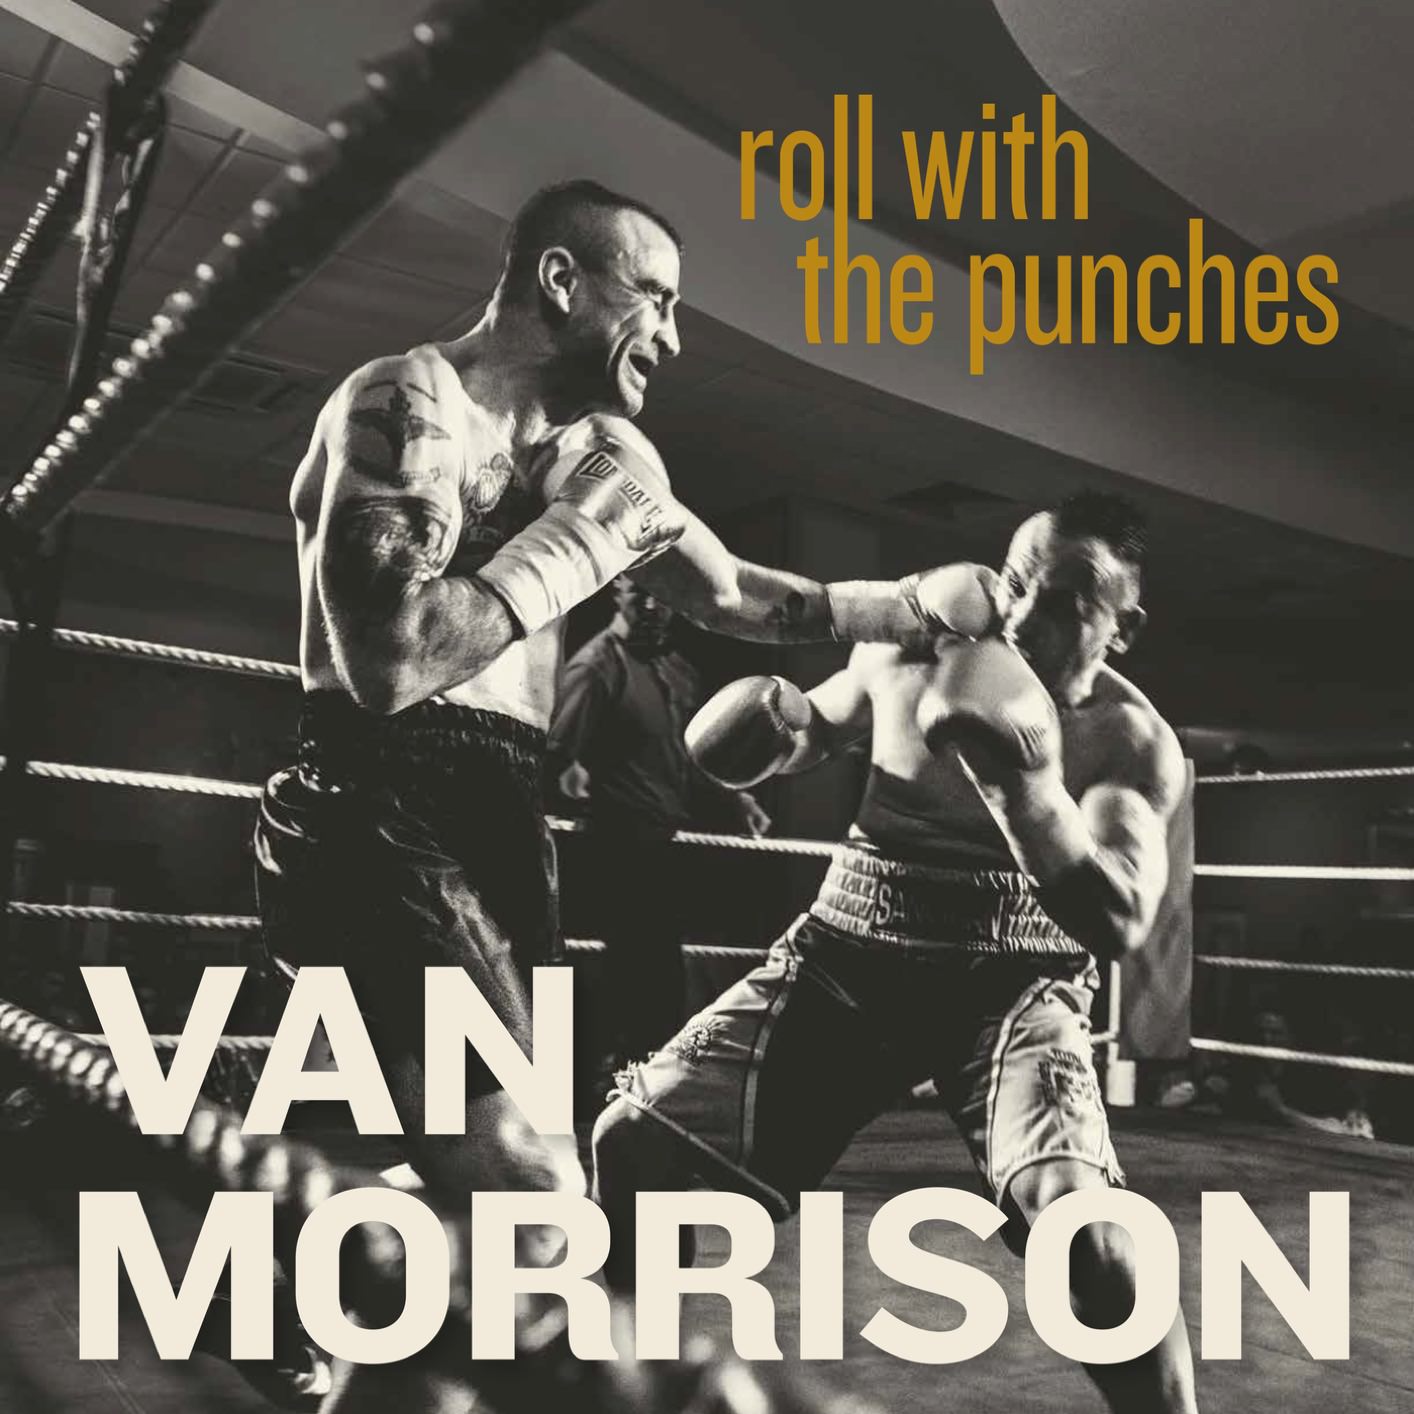 Van Morrison - Roll With The Punches (2017) [HDTracks FLAC 24bit/96kHz]